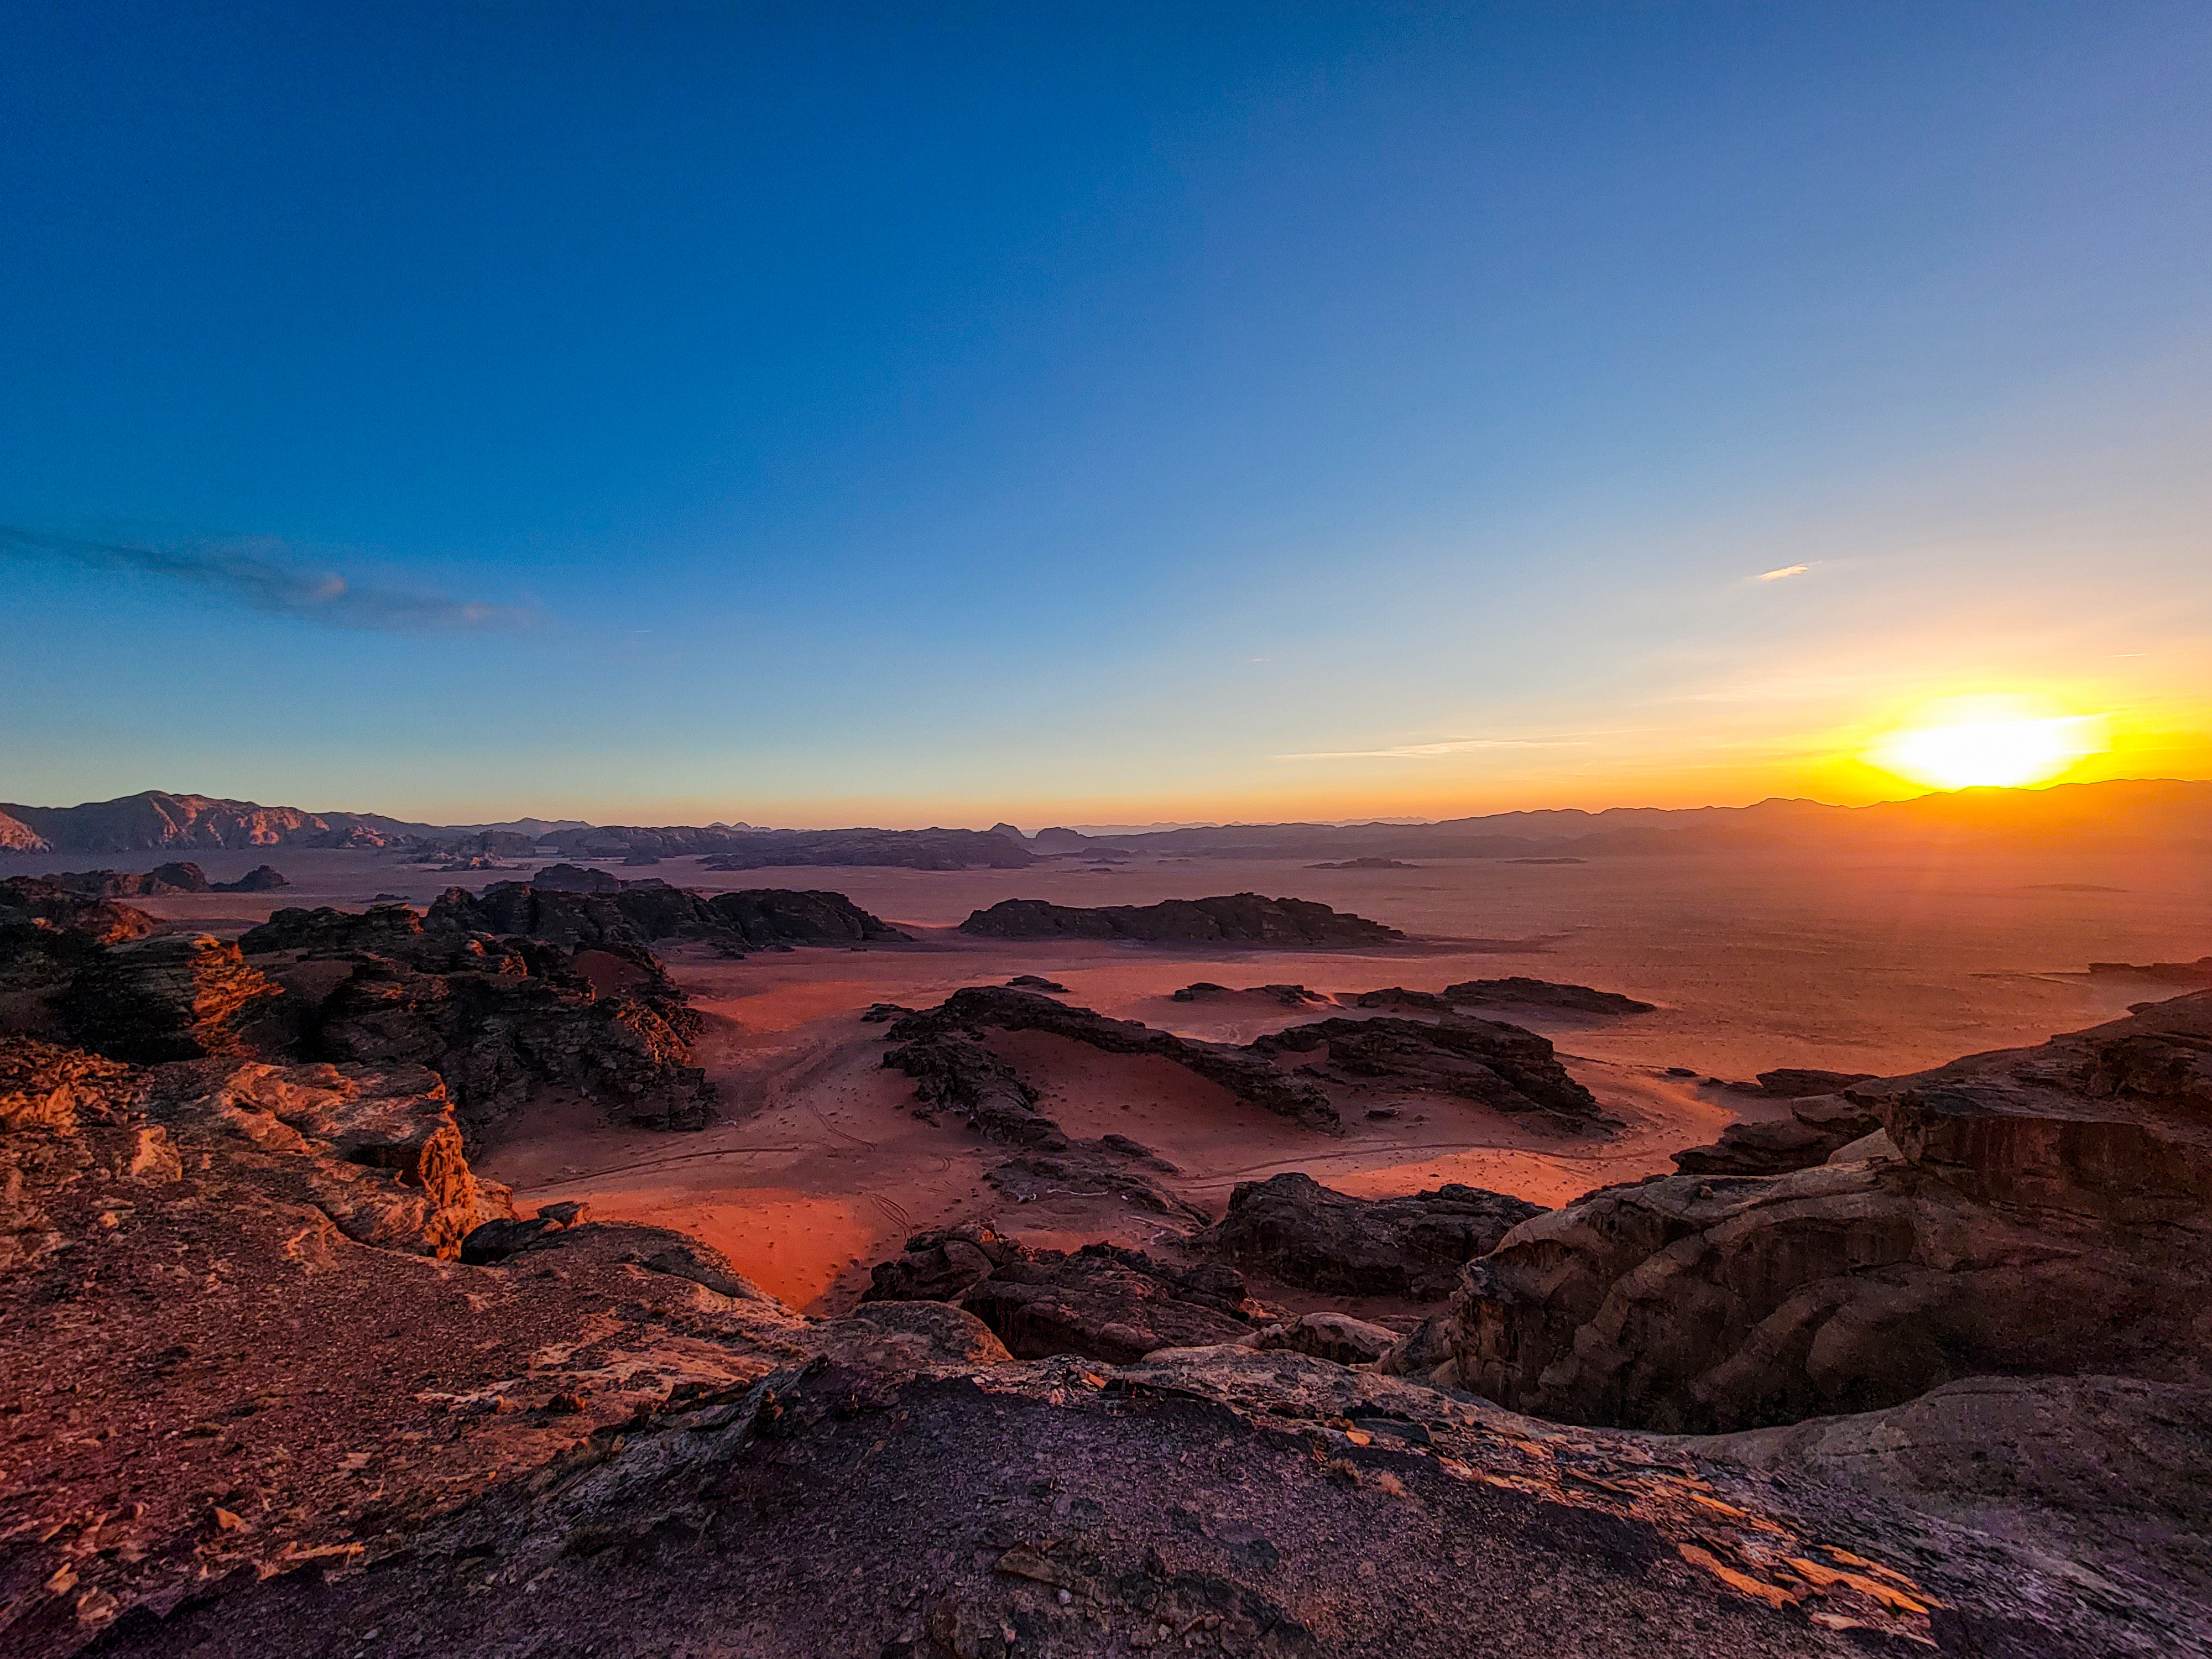 3 MOUNTAINS IN WADI RUM - OVERNIGHT TRIP 25 May 2023